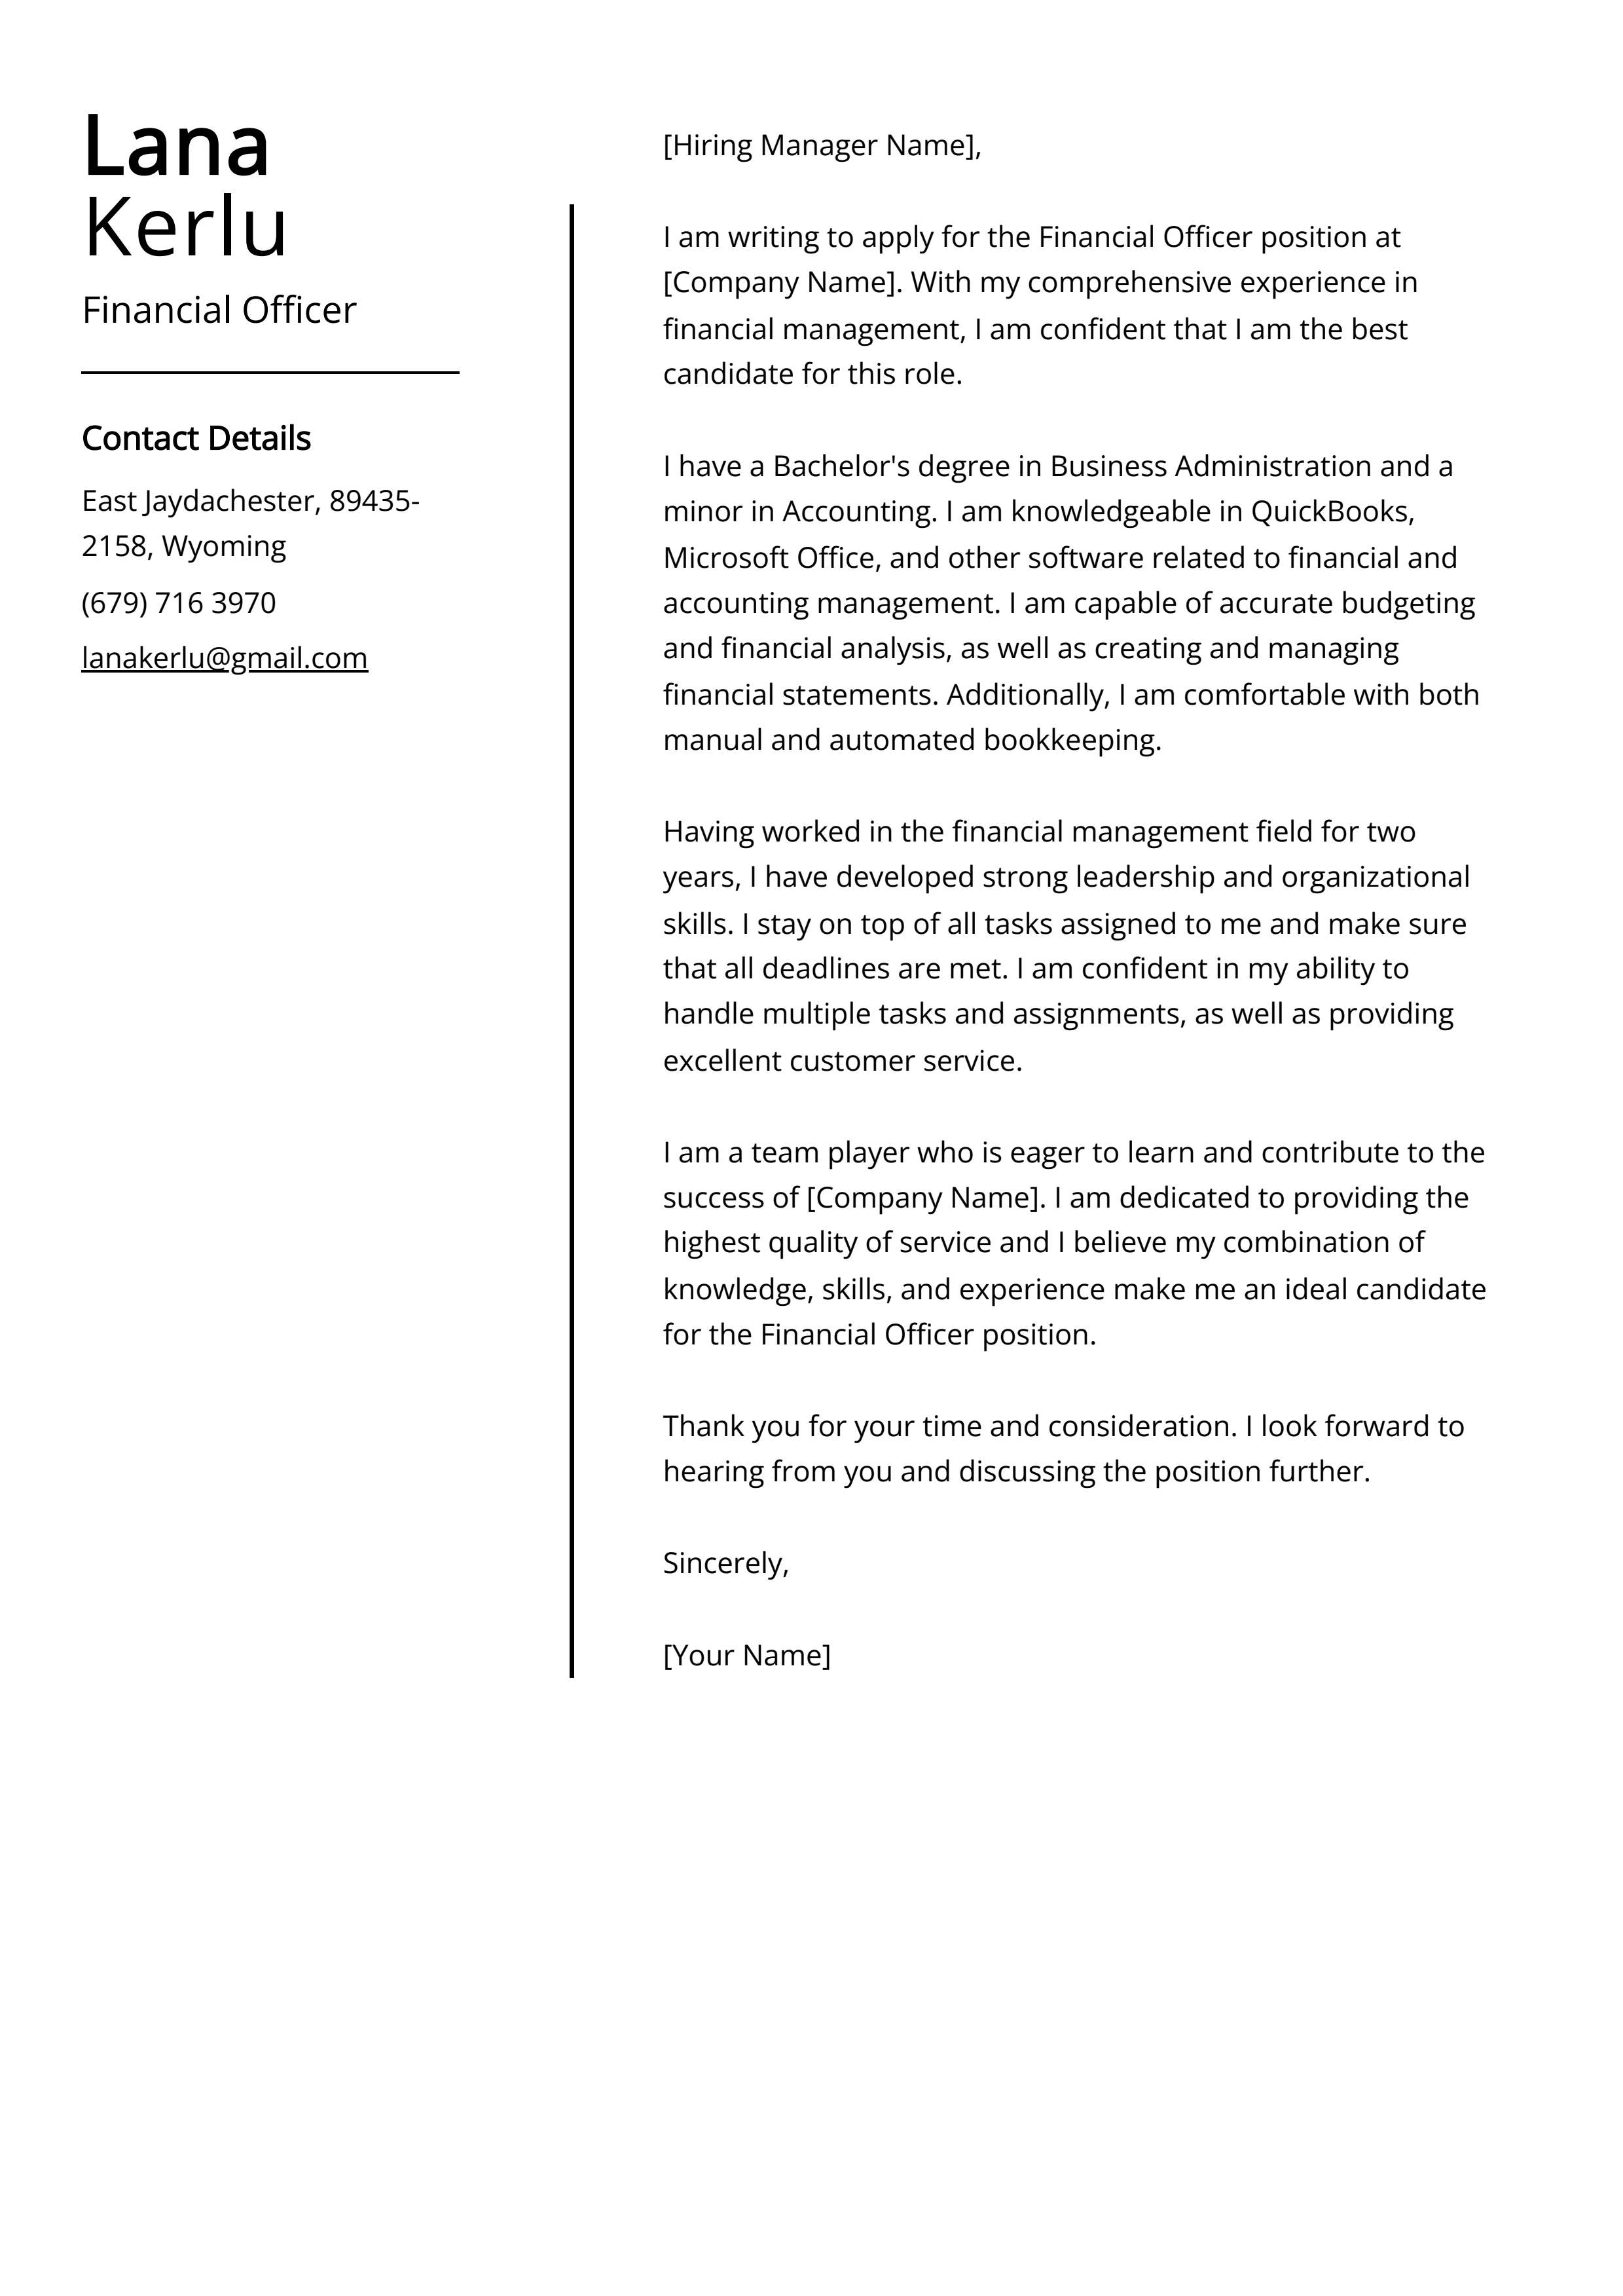 Financial Officer Cover Letter Example